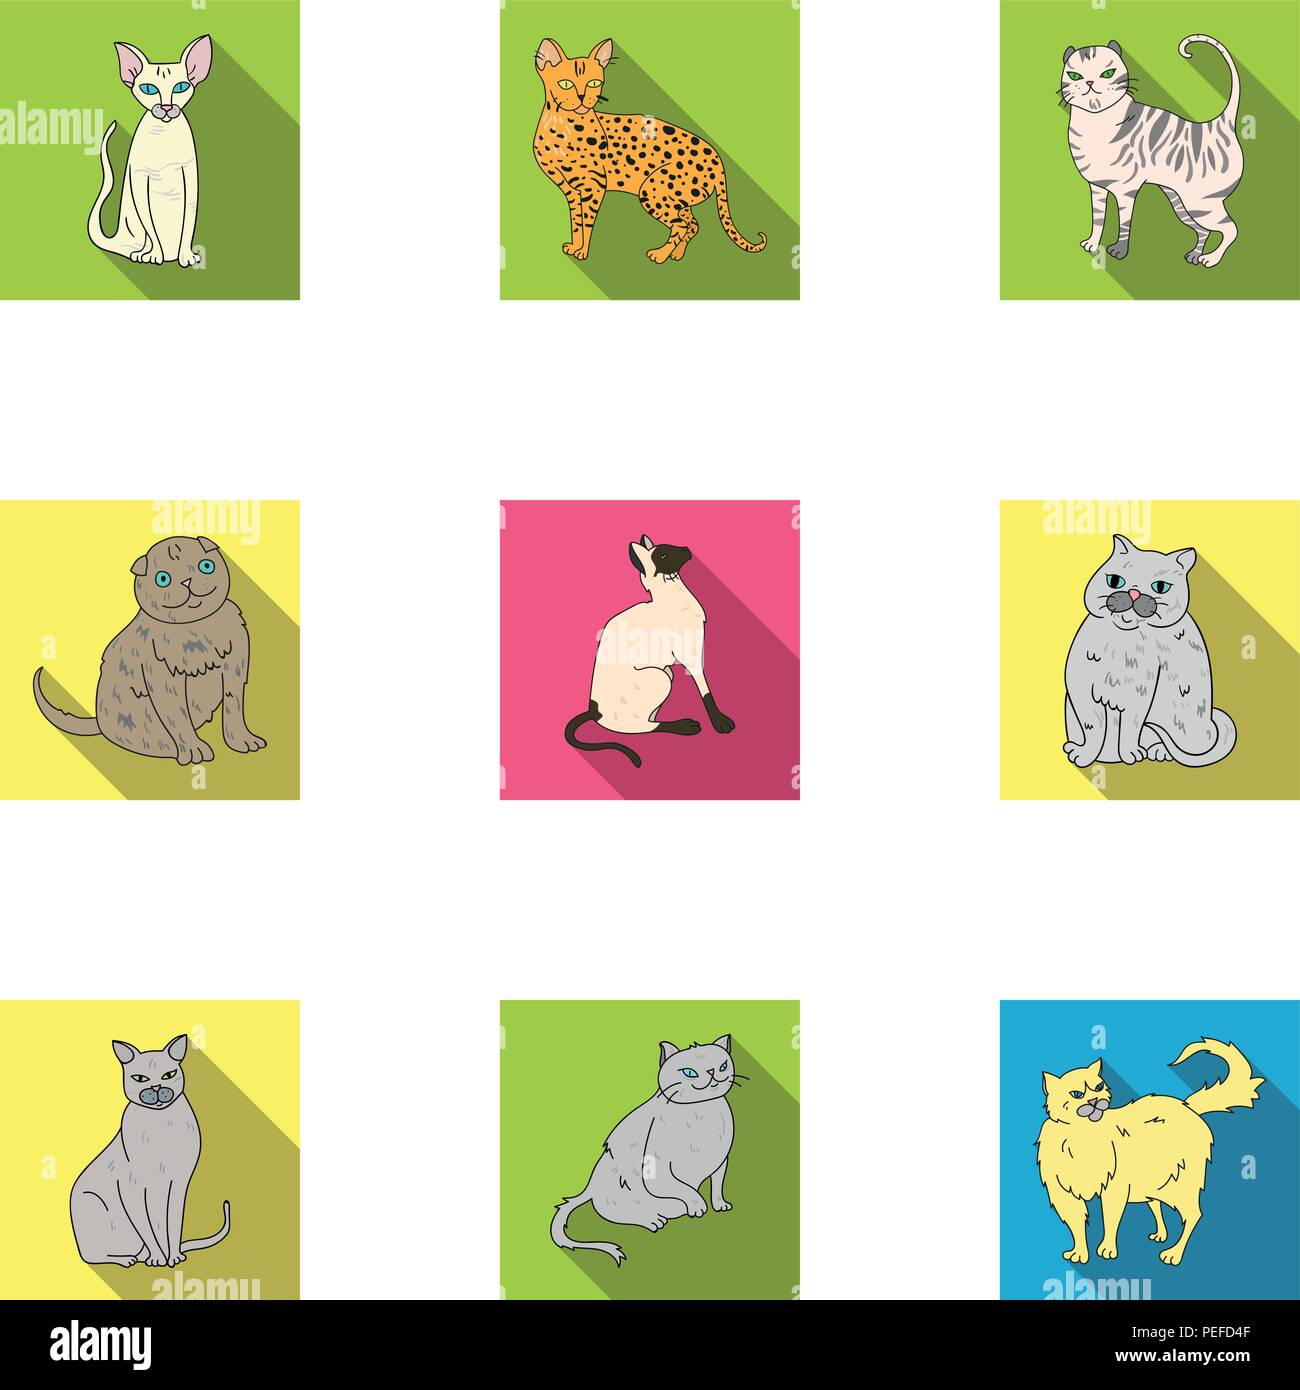 bald,cat,cats,chest,collection,curly,different,ears,egyptian,evil,fat,flat,good,gray,icon,illustration,isolated,leopard,logo,neck,object,one,picture,set,sign,sphinx,spotted,striped,symbol,tail,thin,vector,web,white, Vector Vectors , Stock Vector